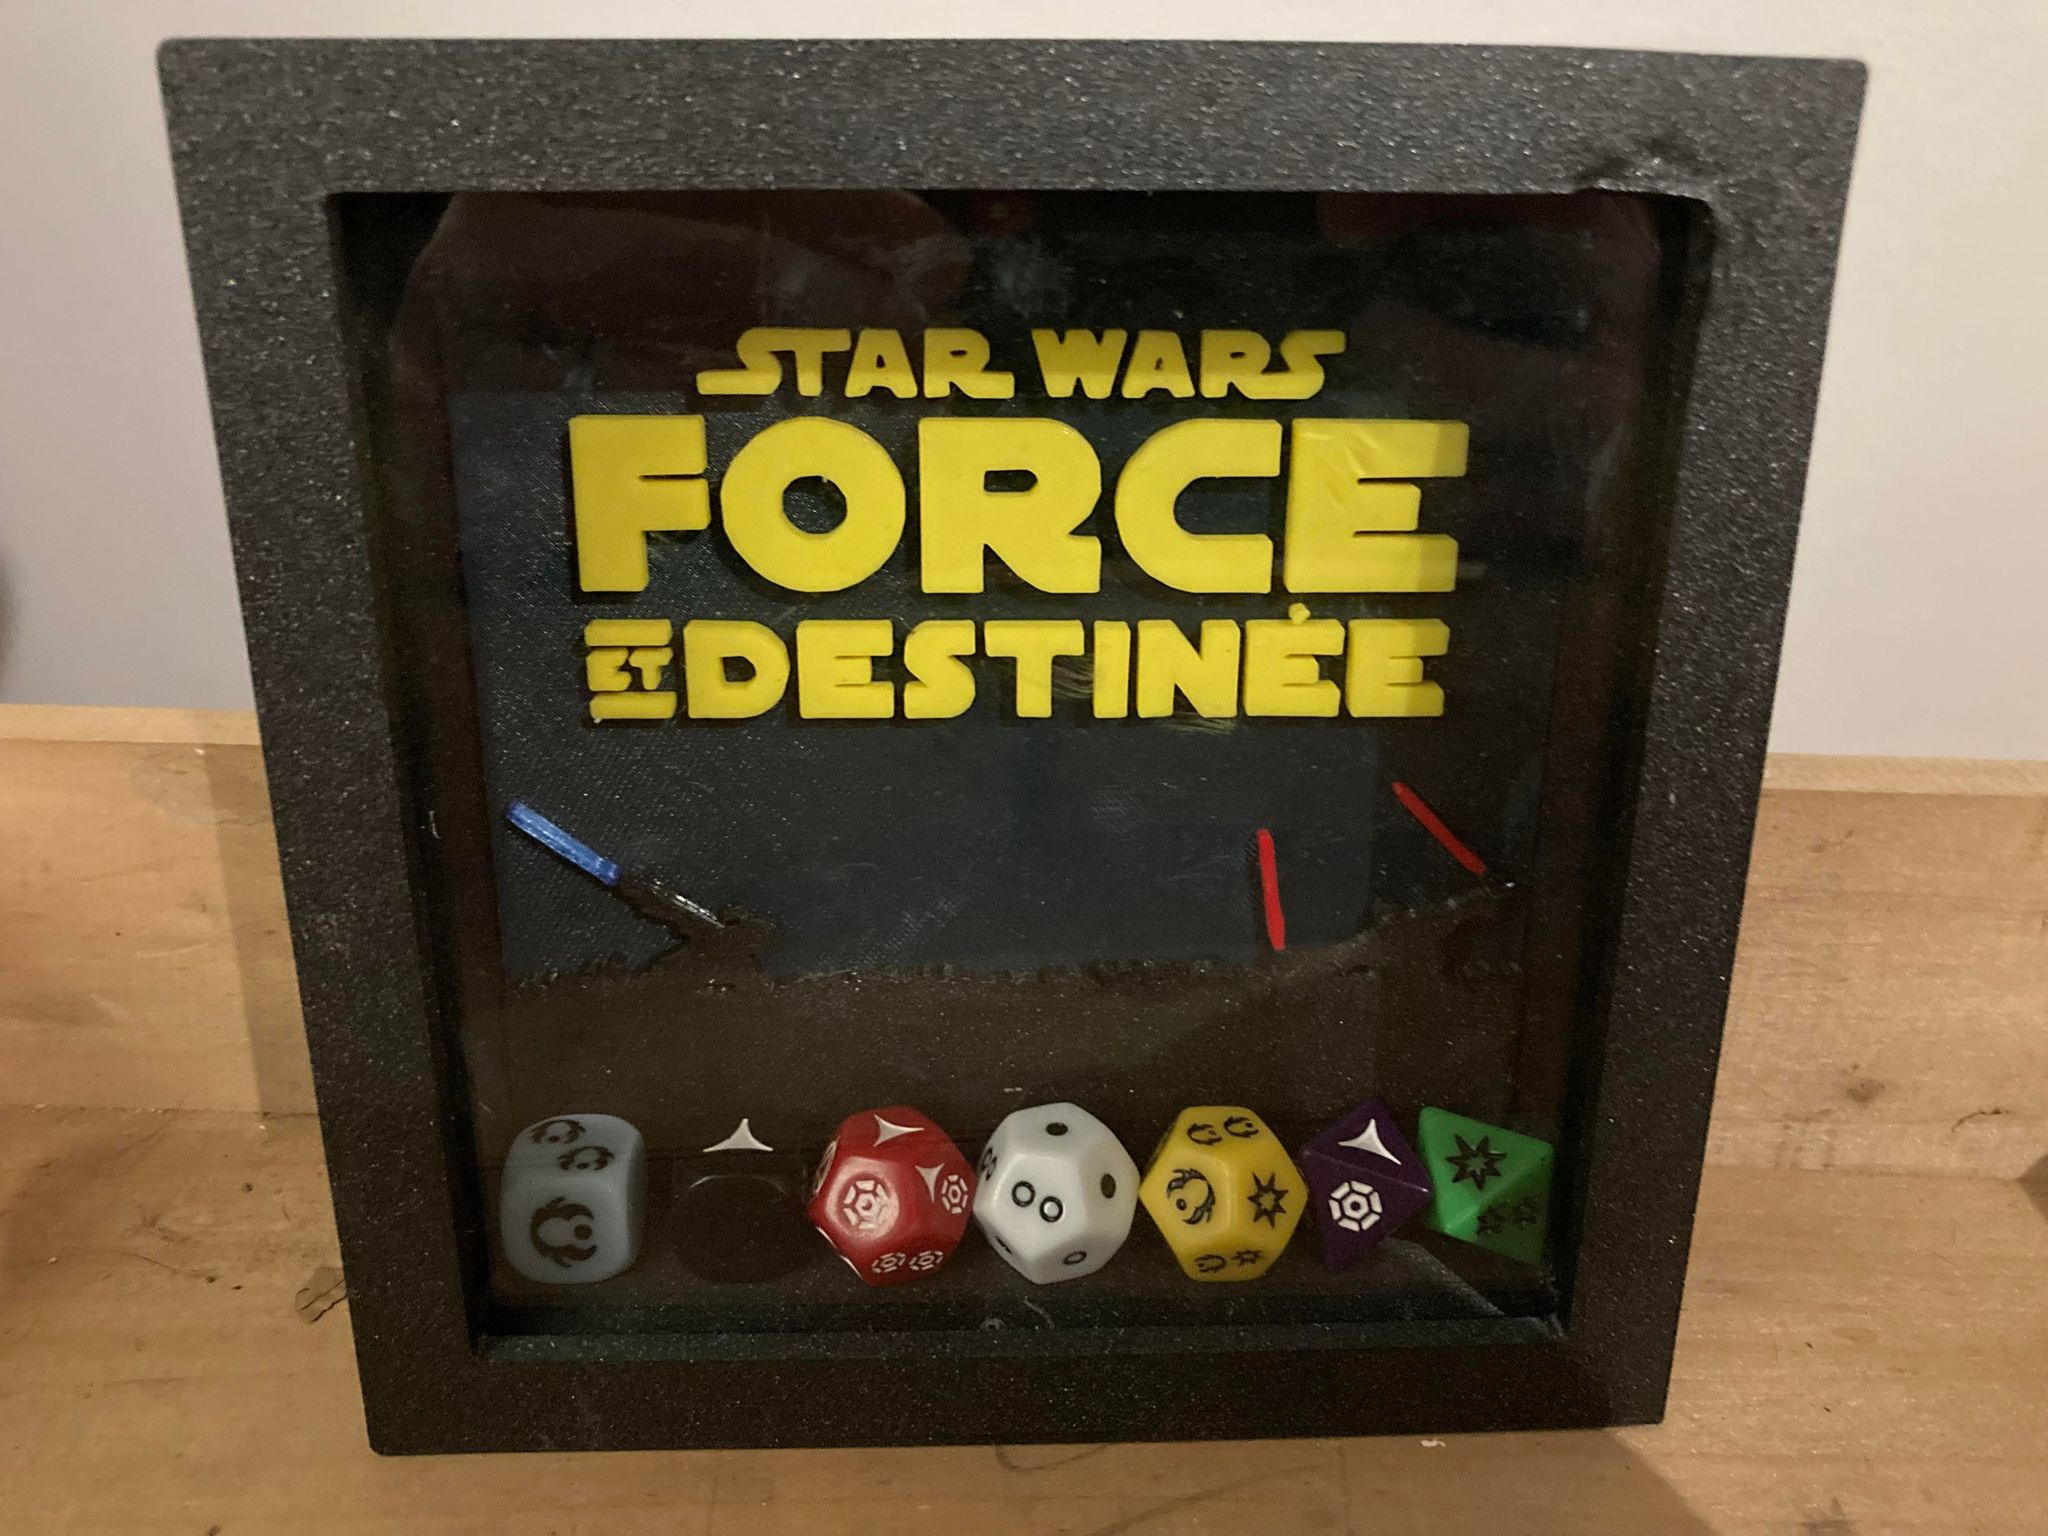 3D Printed Force and destiny Dice Box